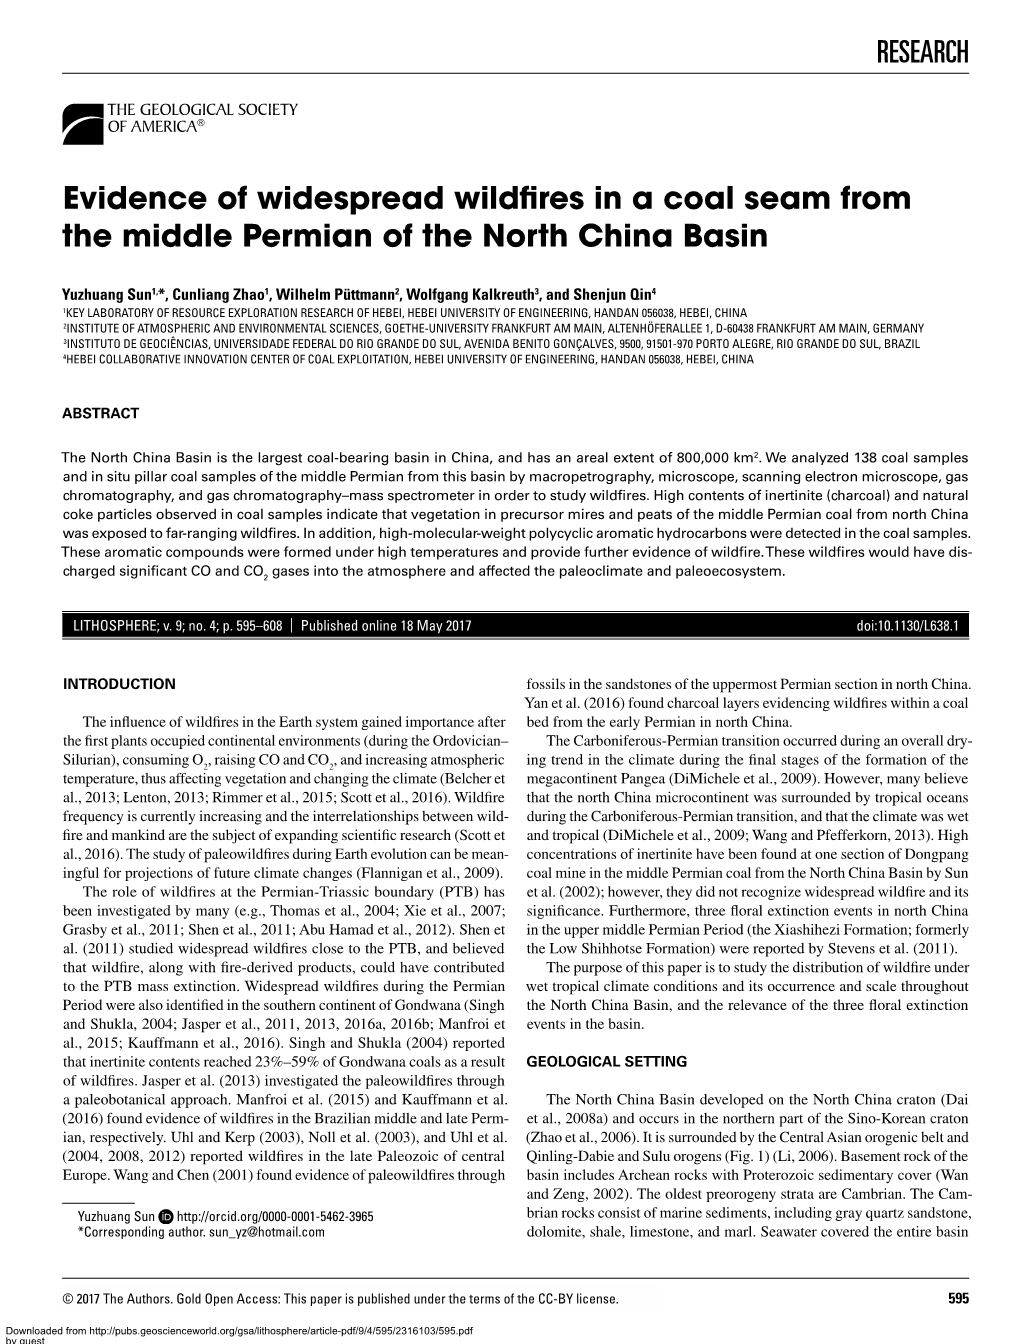 RESEARCH Evidence of Widespread Wildfires in a Coal Seam from The